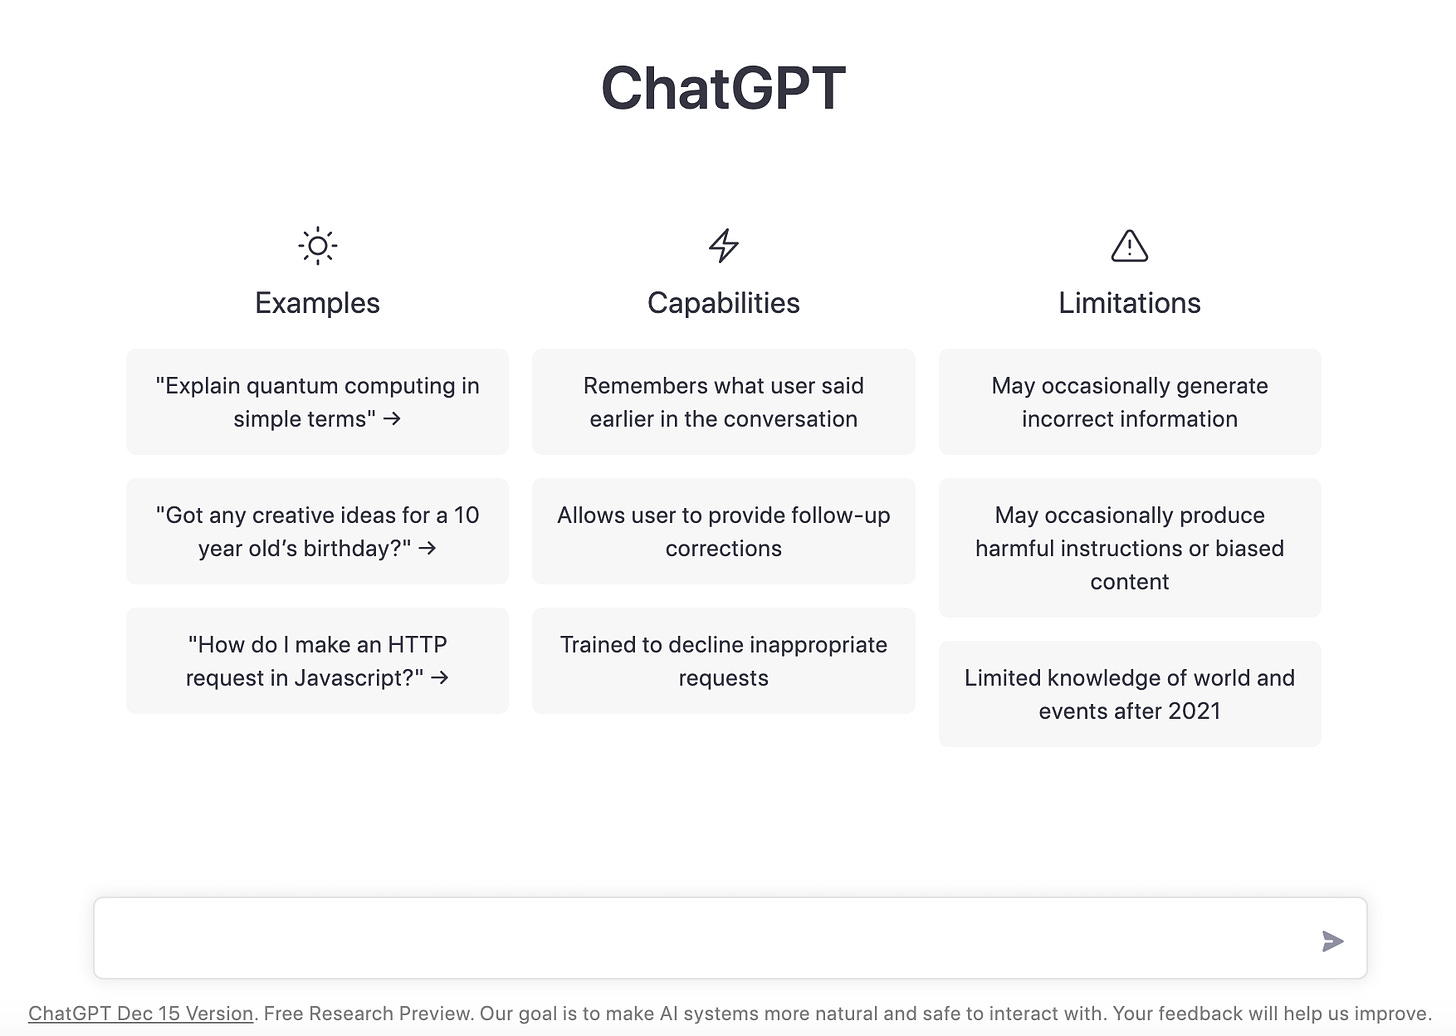 ChatGPT's interface